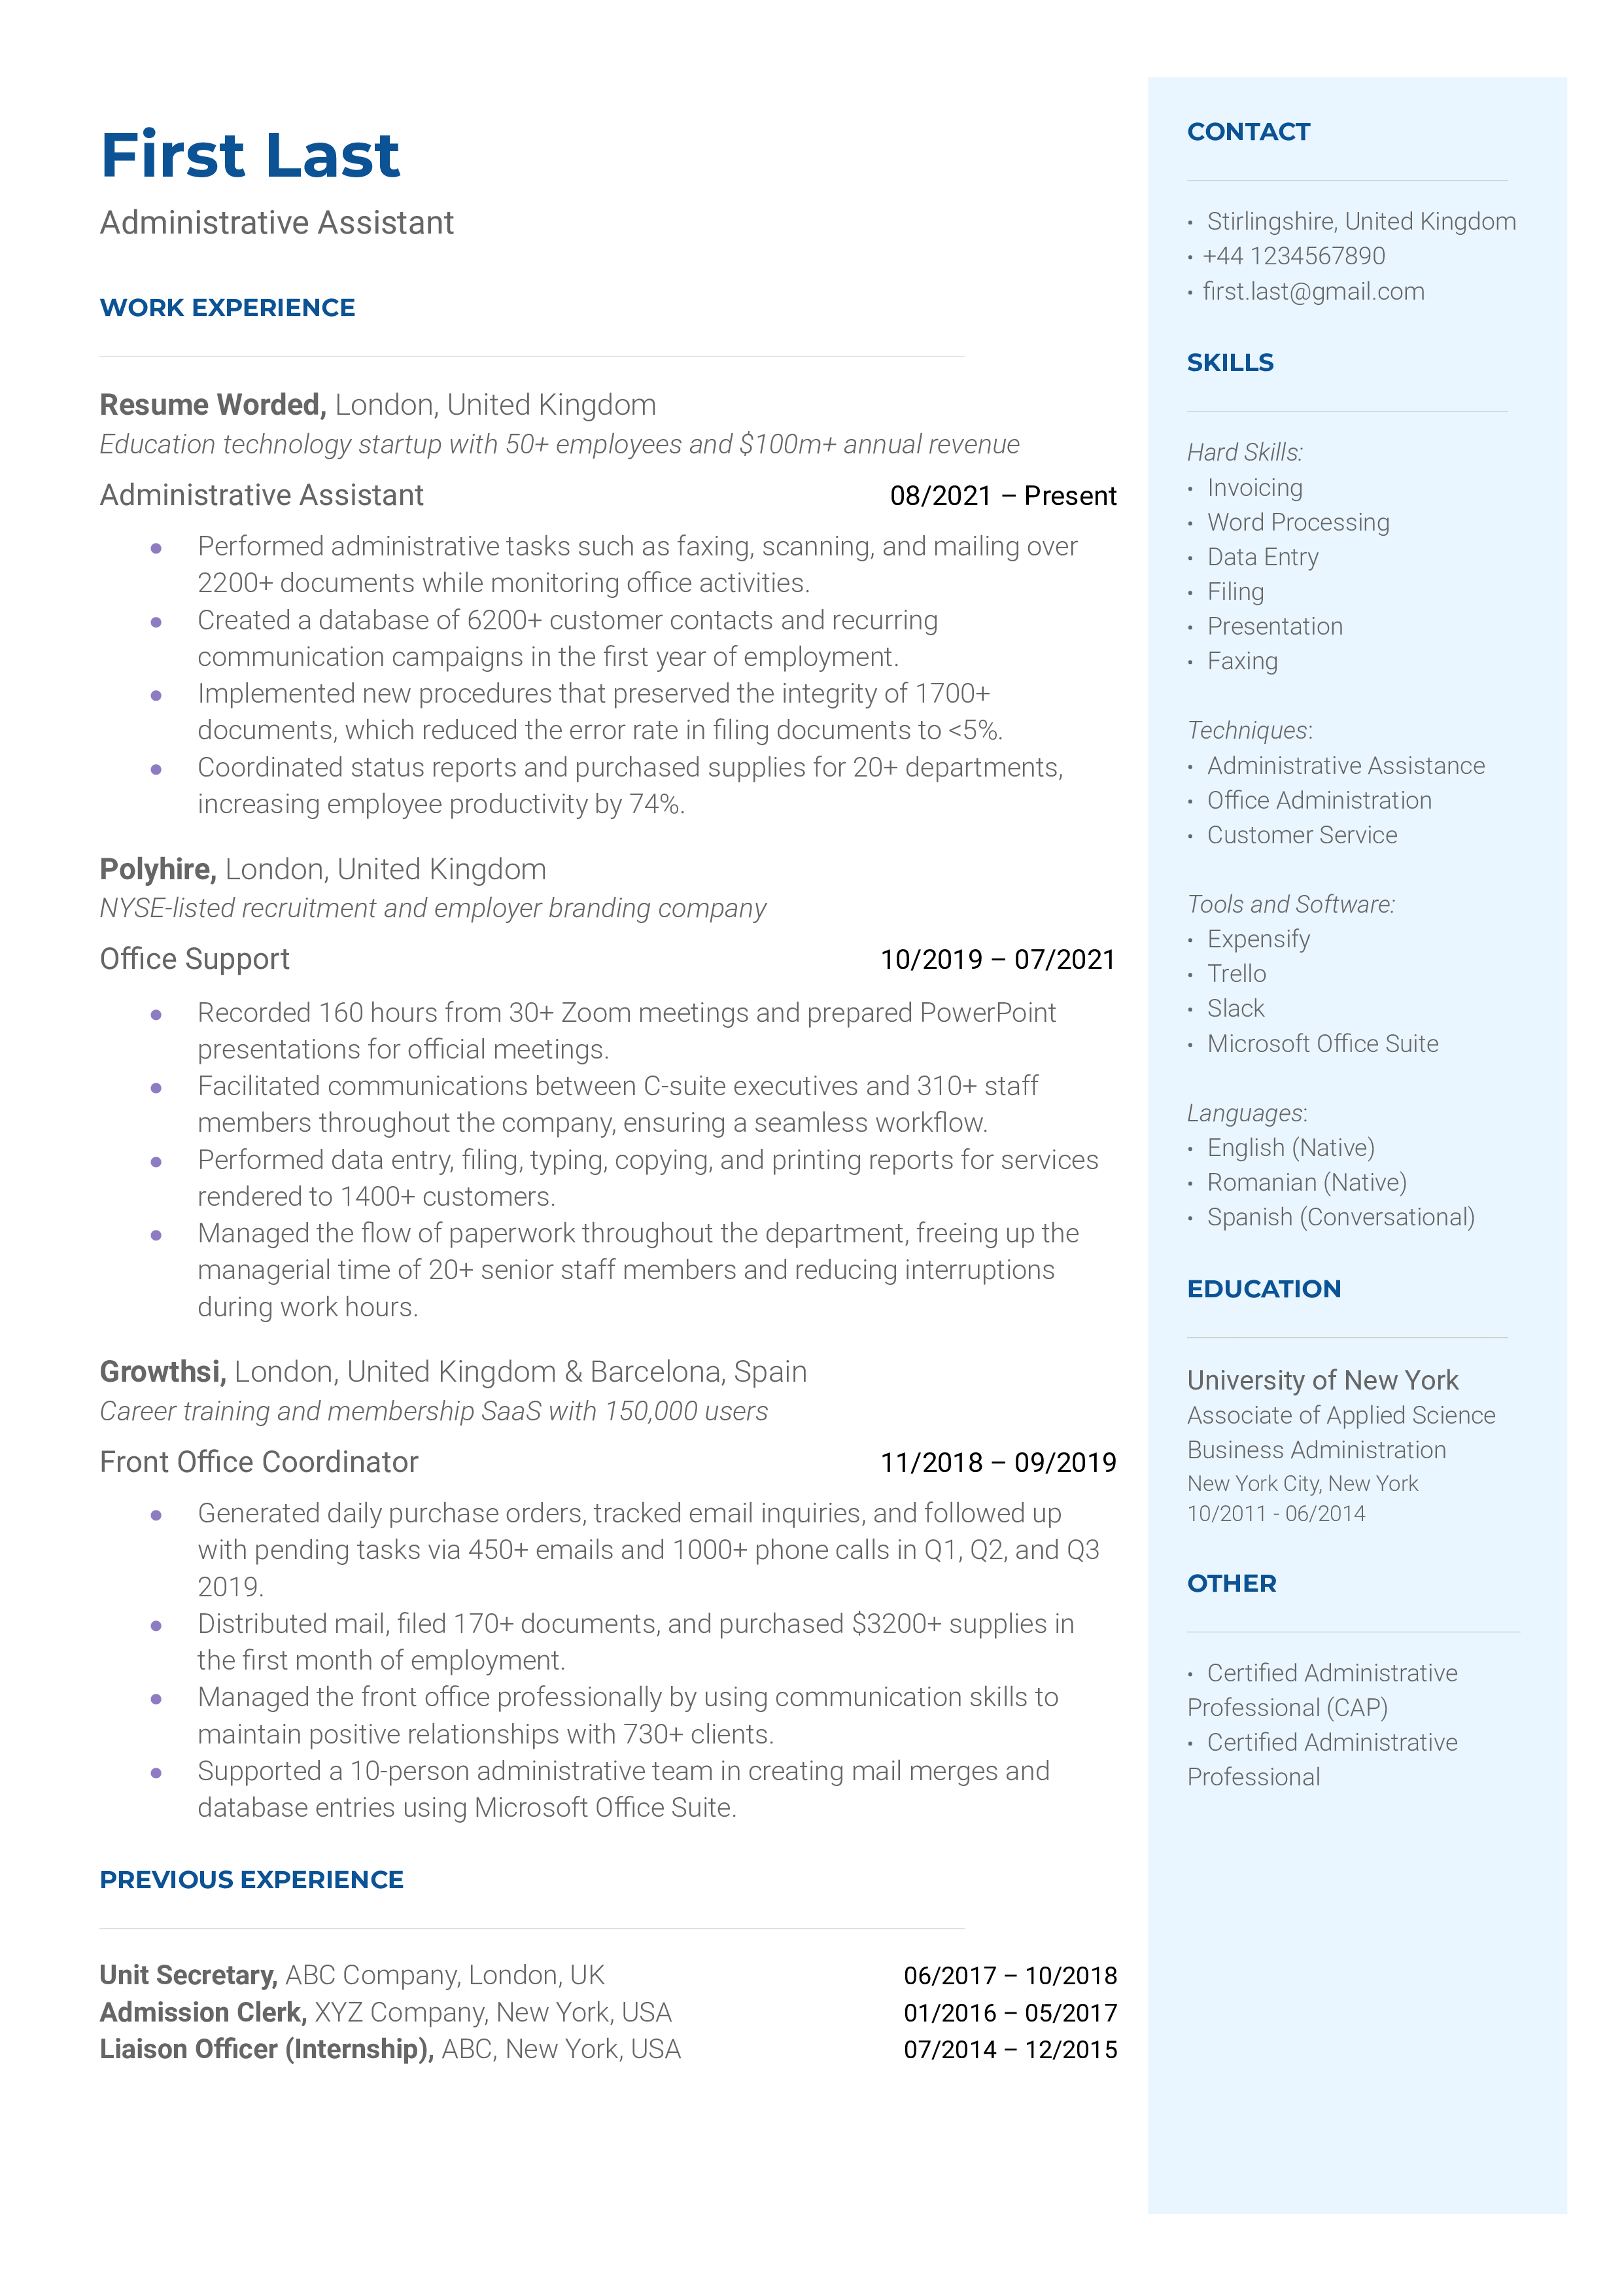 A resume for an administrative assistant with a bachelor's degree and experience as an administrative secretary and specialist.